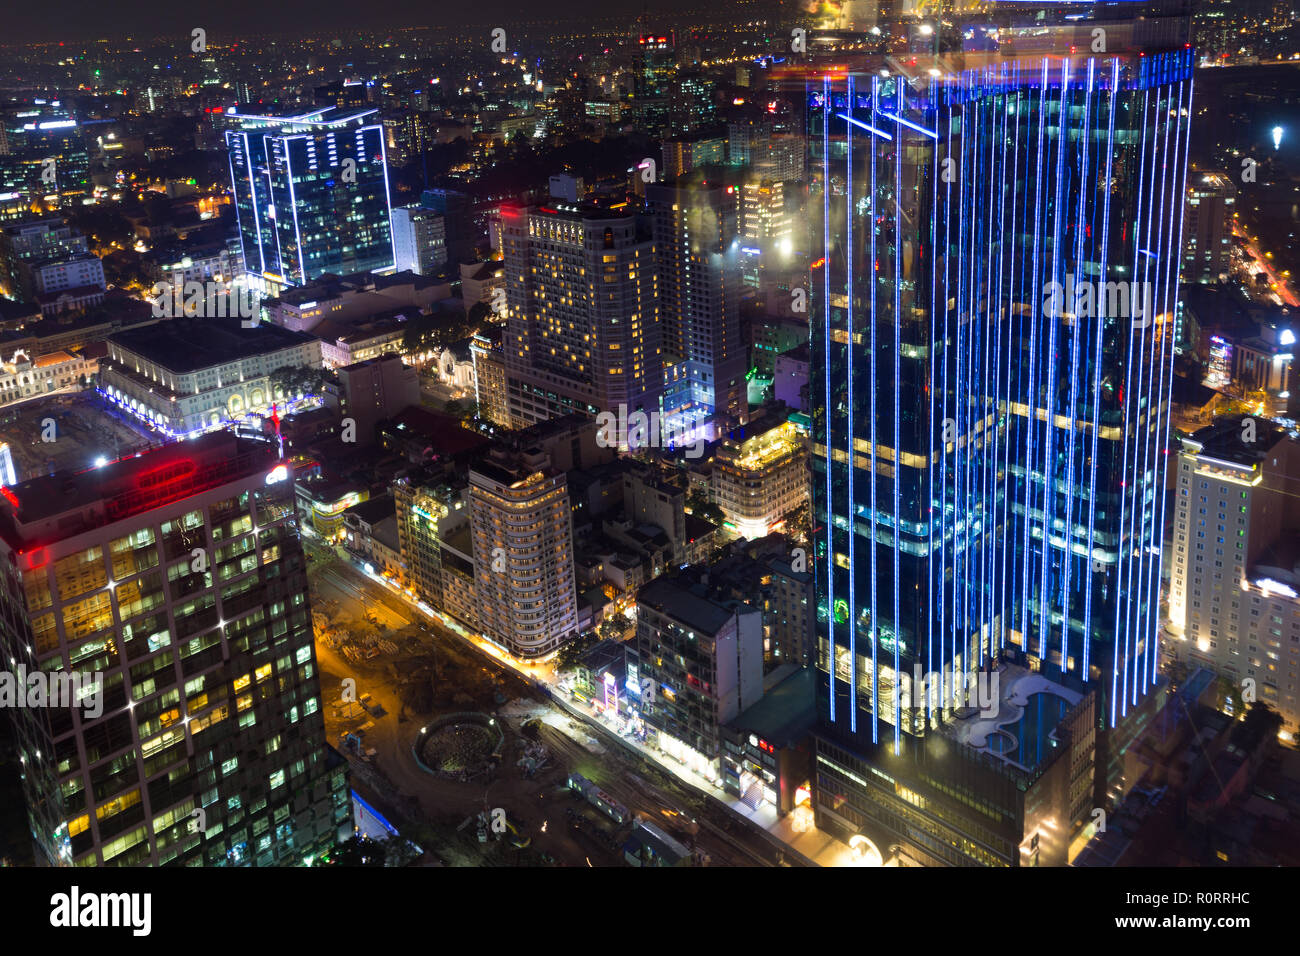 Saigon cityscape at night, view from the Bitexco tower, Vietnam Stock Photo